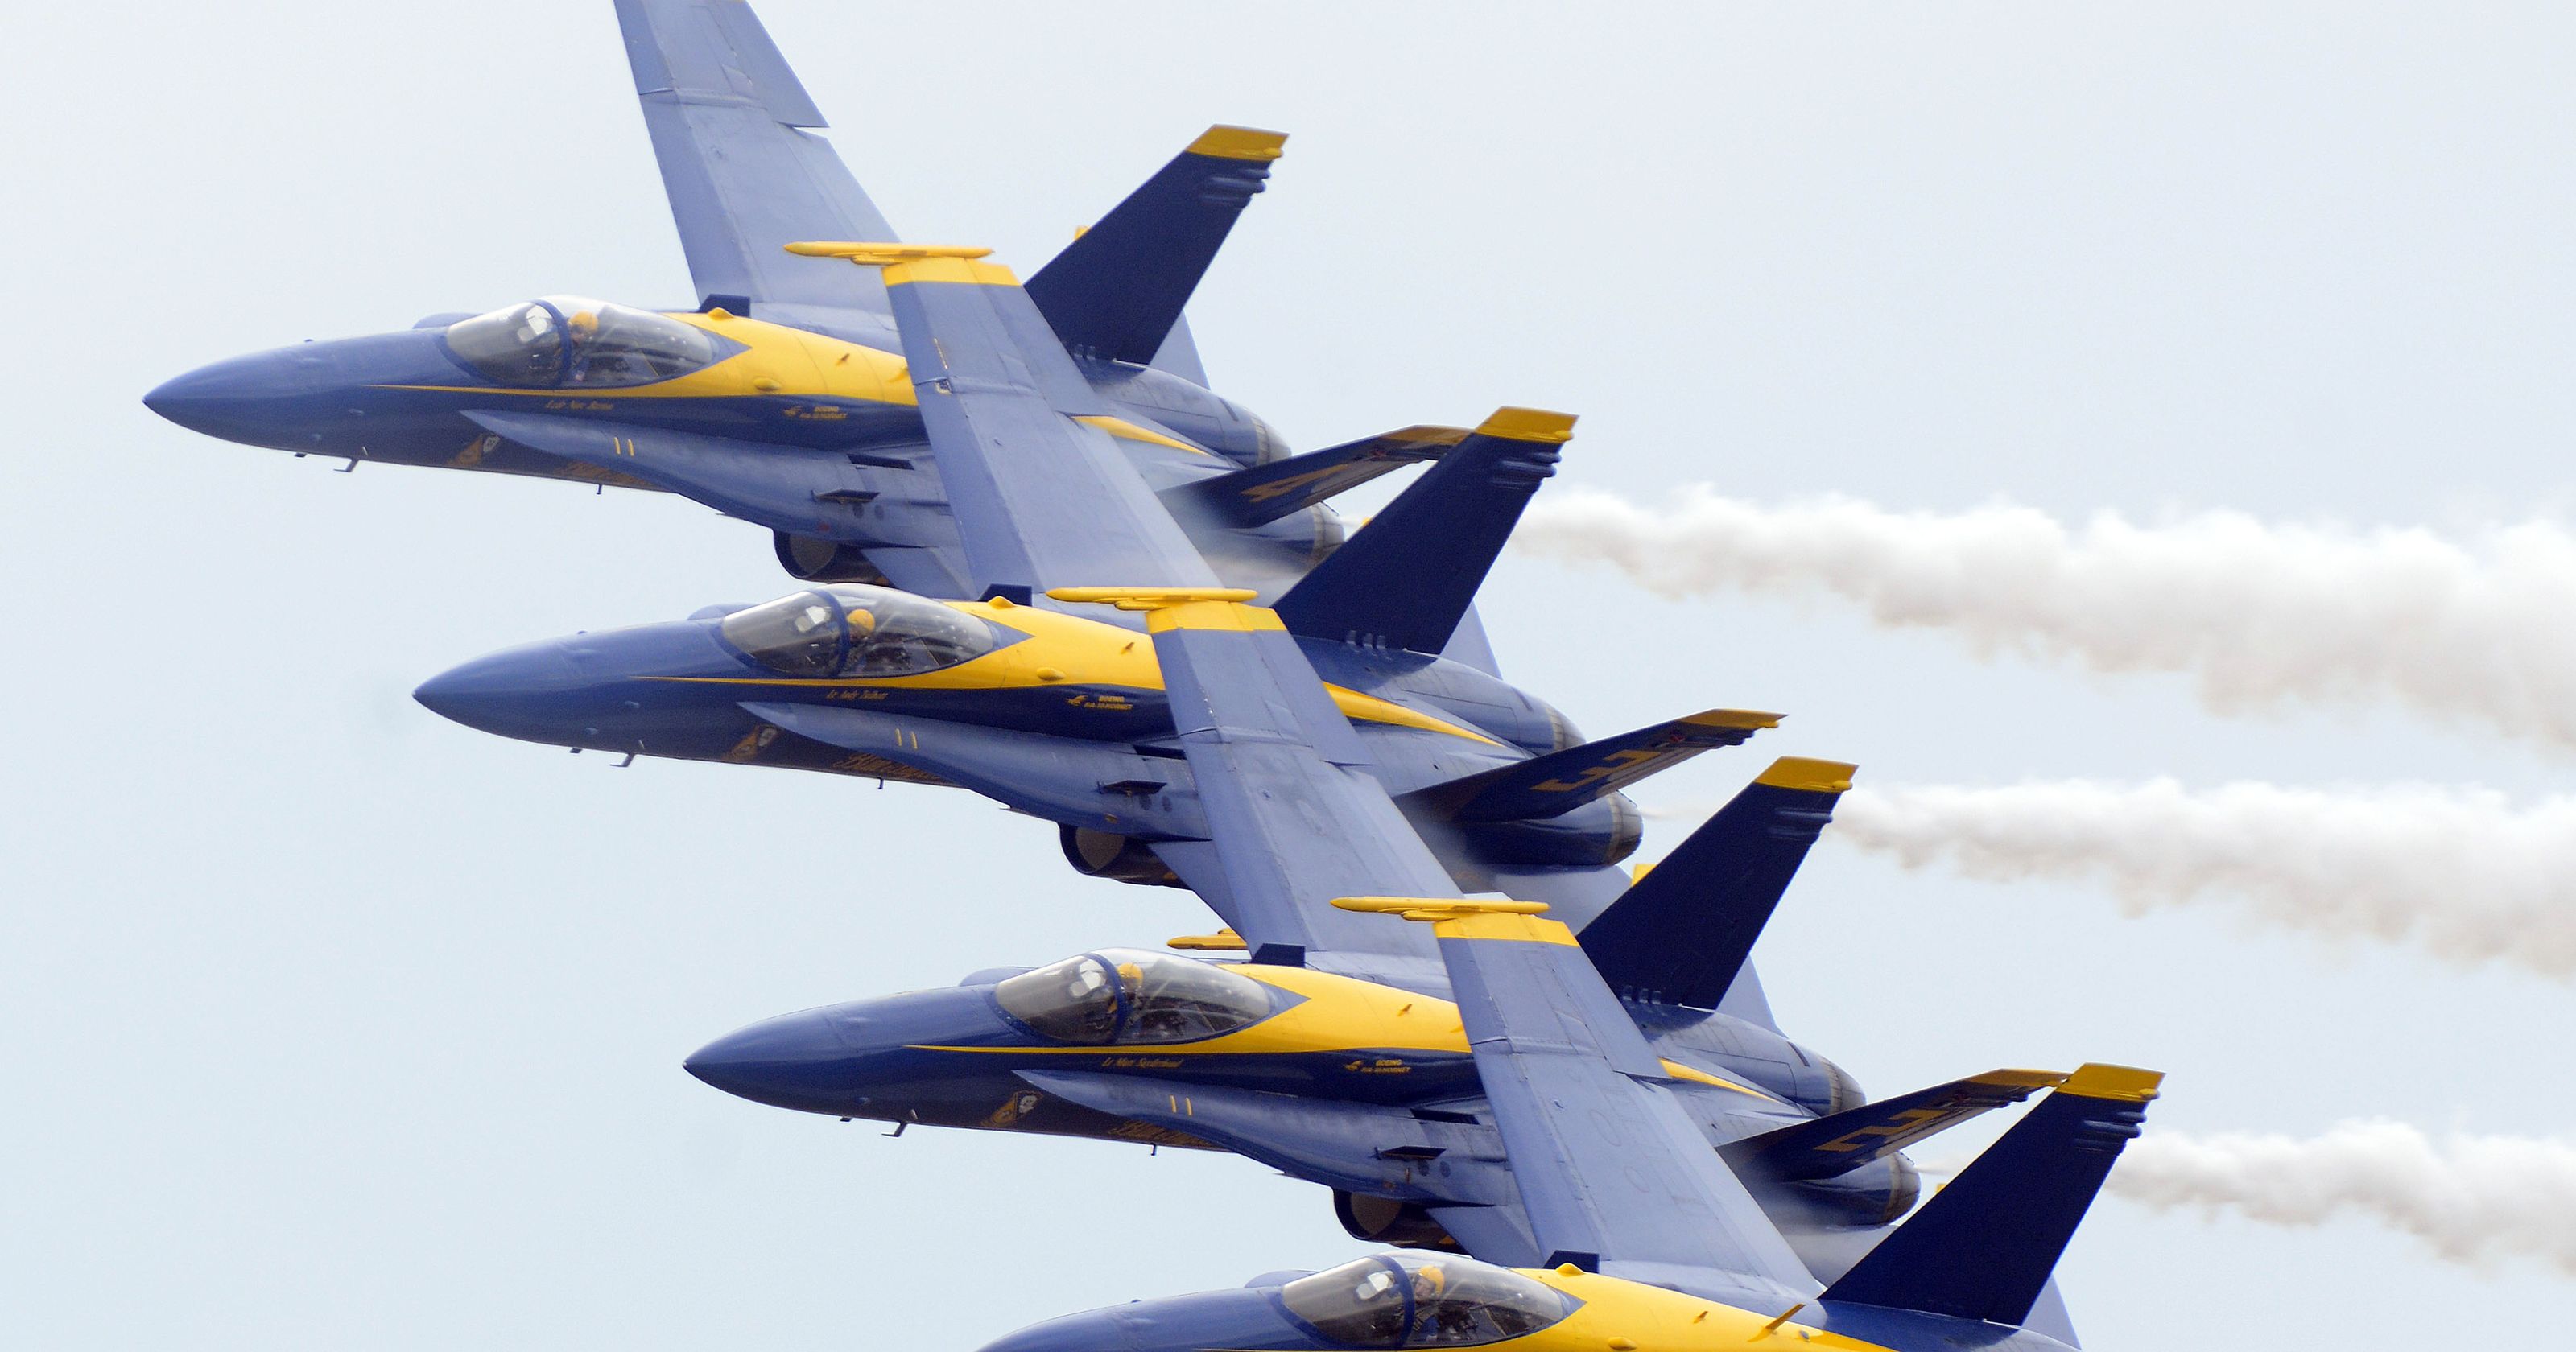 The Blue Angels are part of Pensacola history, family